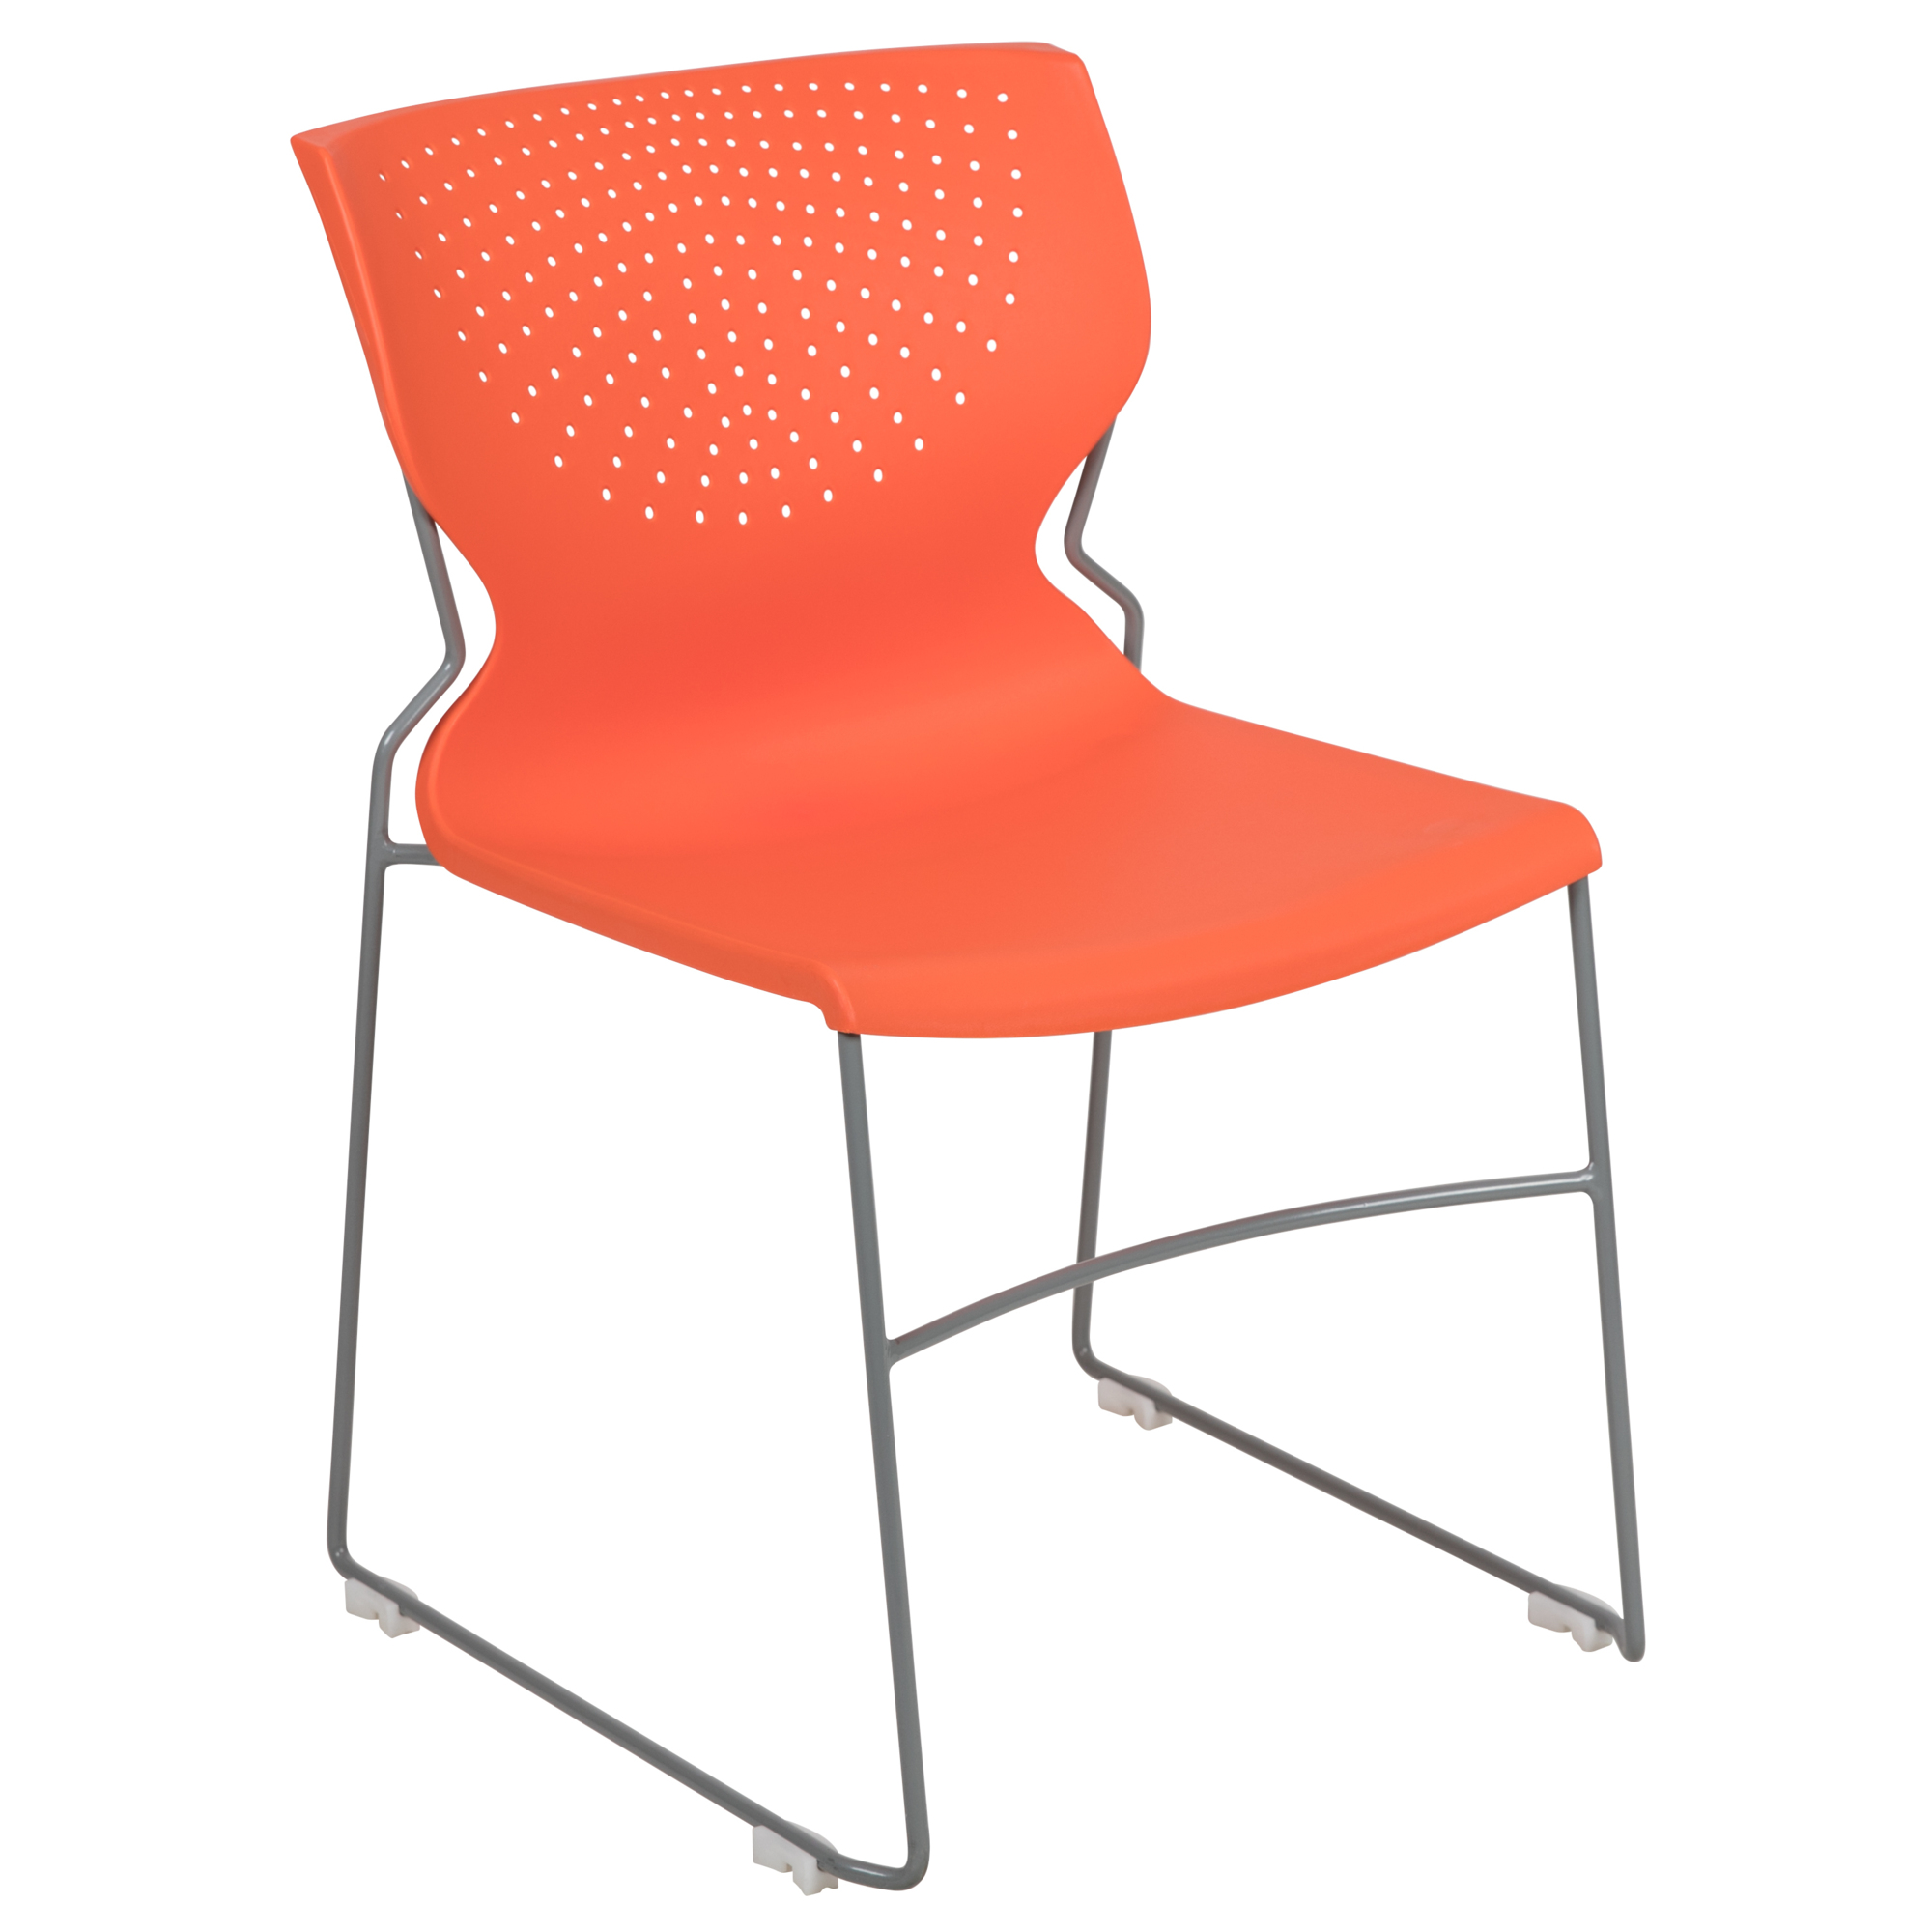 Flash Furniture, Orange Full Back Stack Chair with Gray Frame, Primary Color Orange, Included (qty.) 1, Model RUT438OR